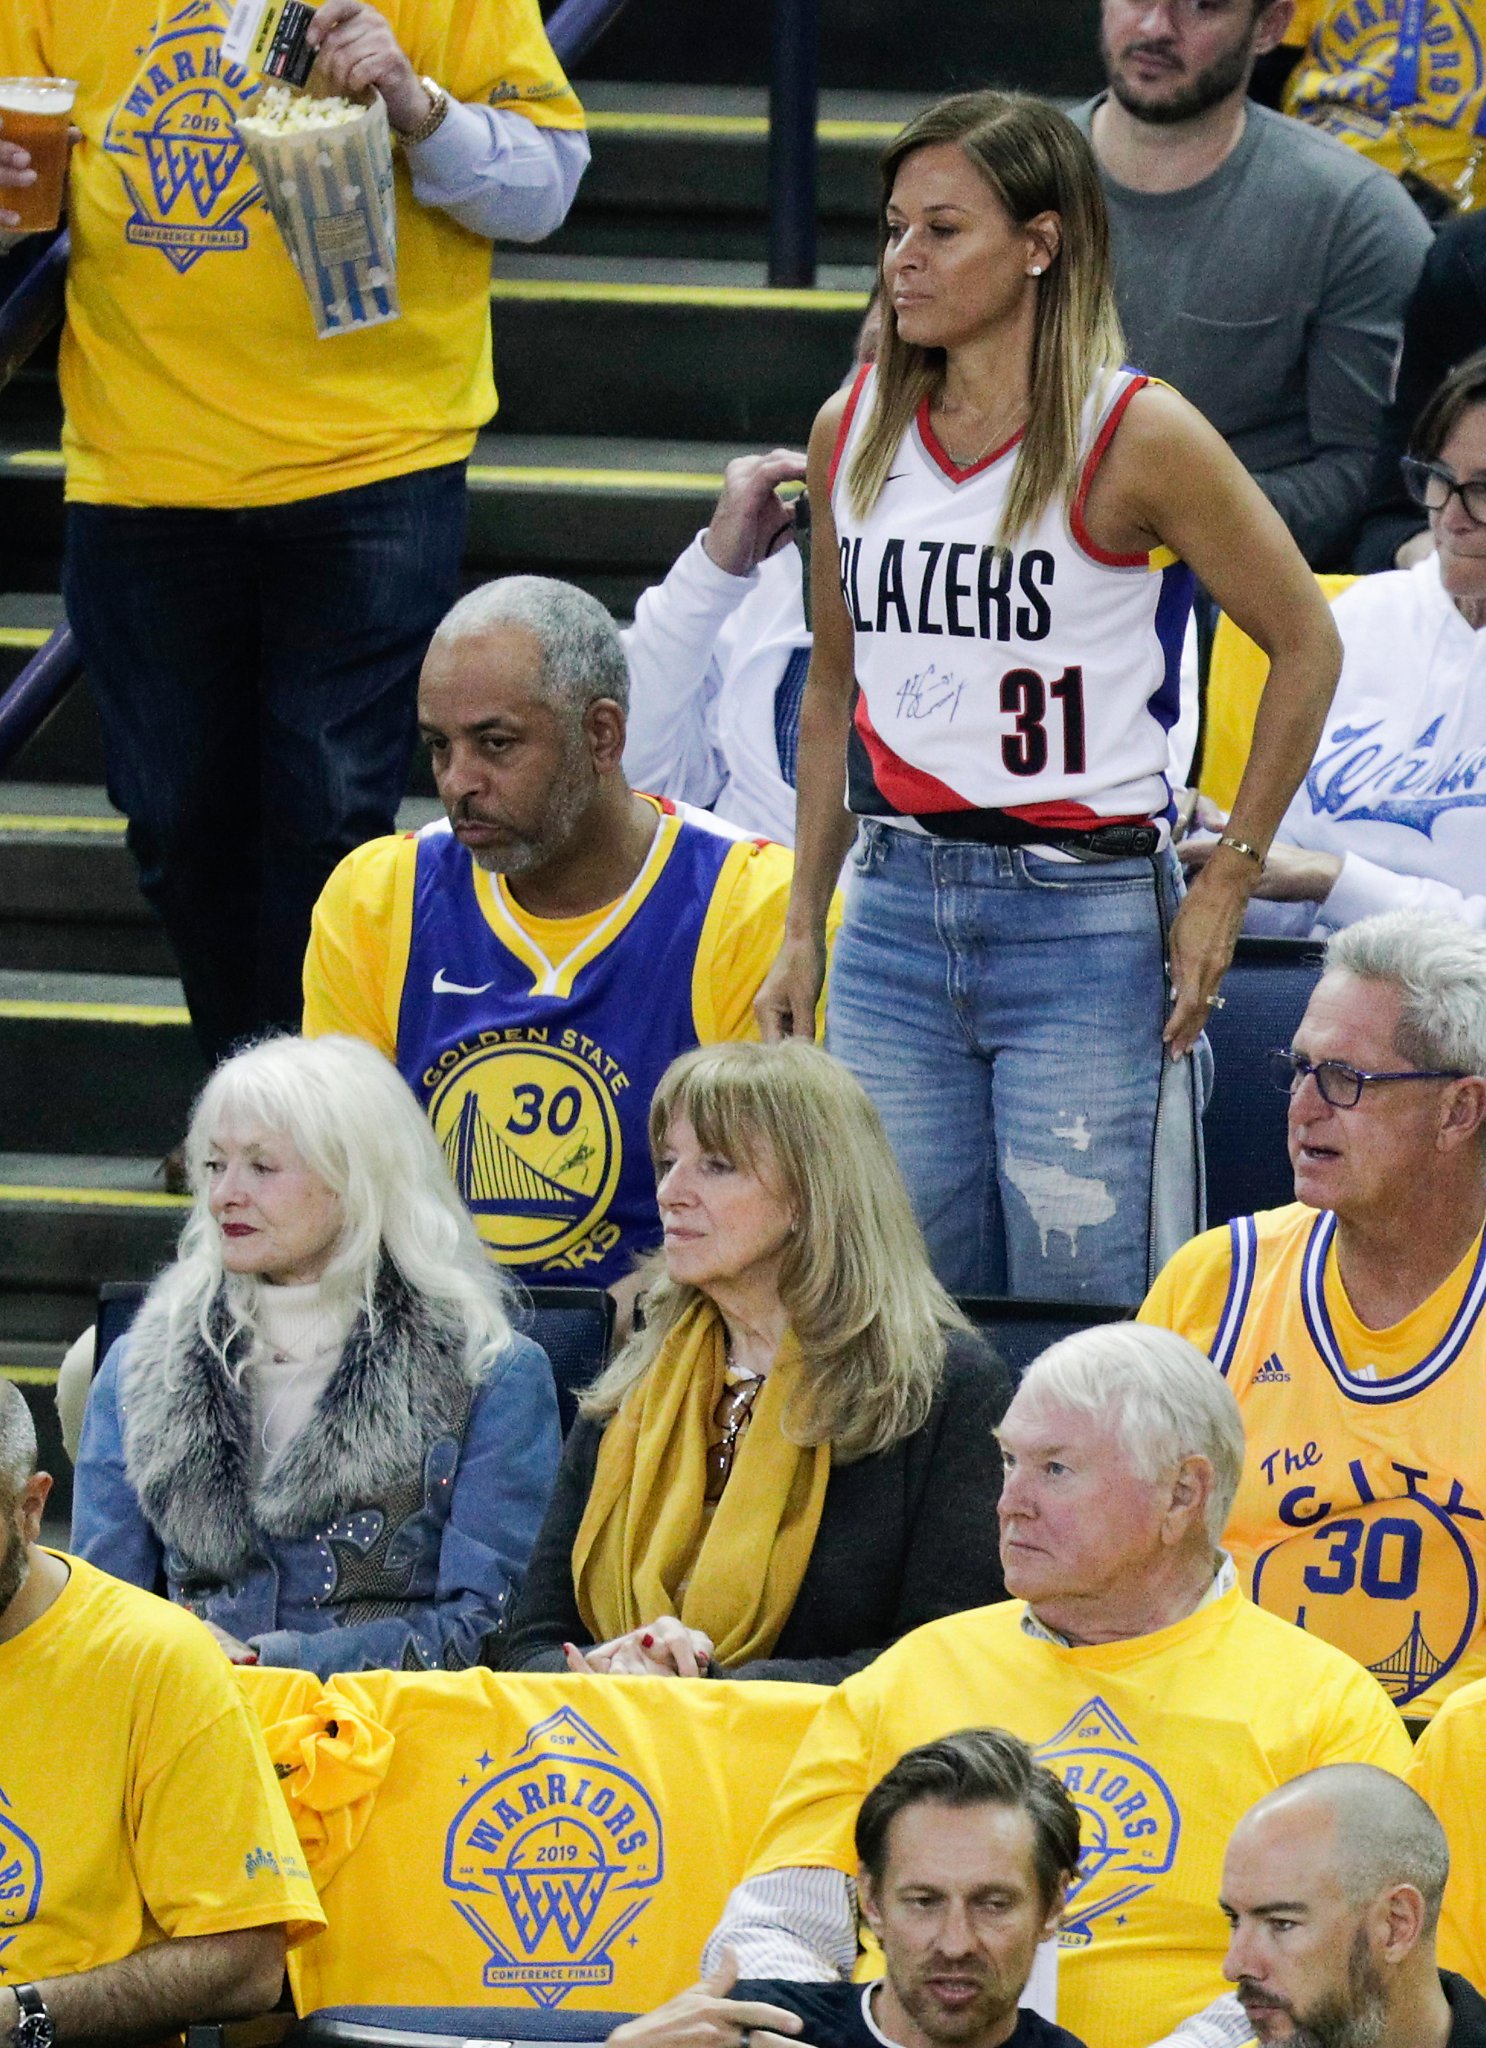 All About Steph Curry's Parents, Dell and Sonya Curry